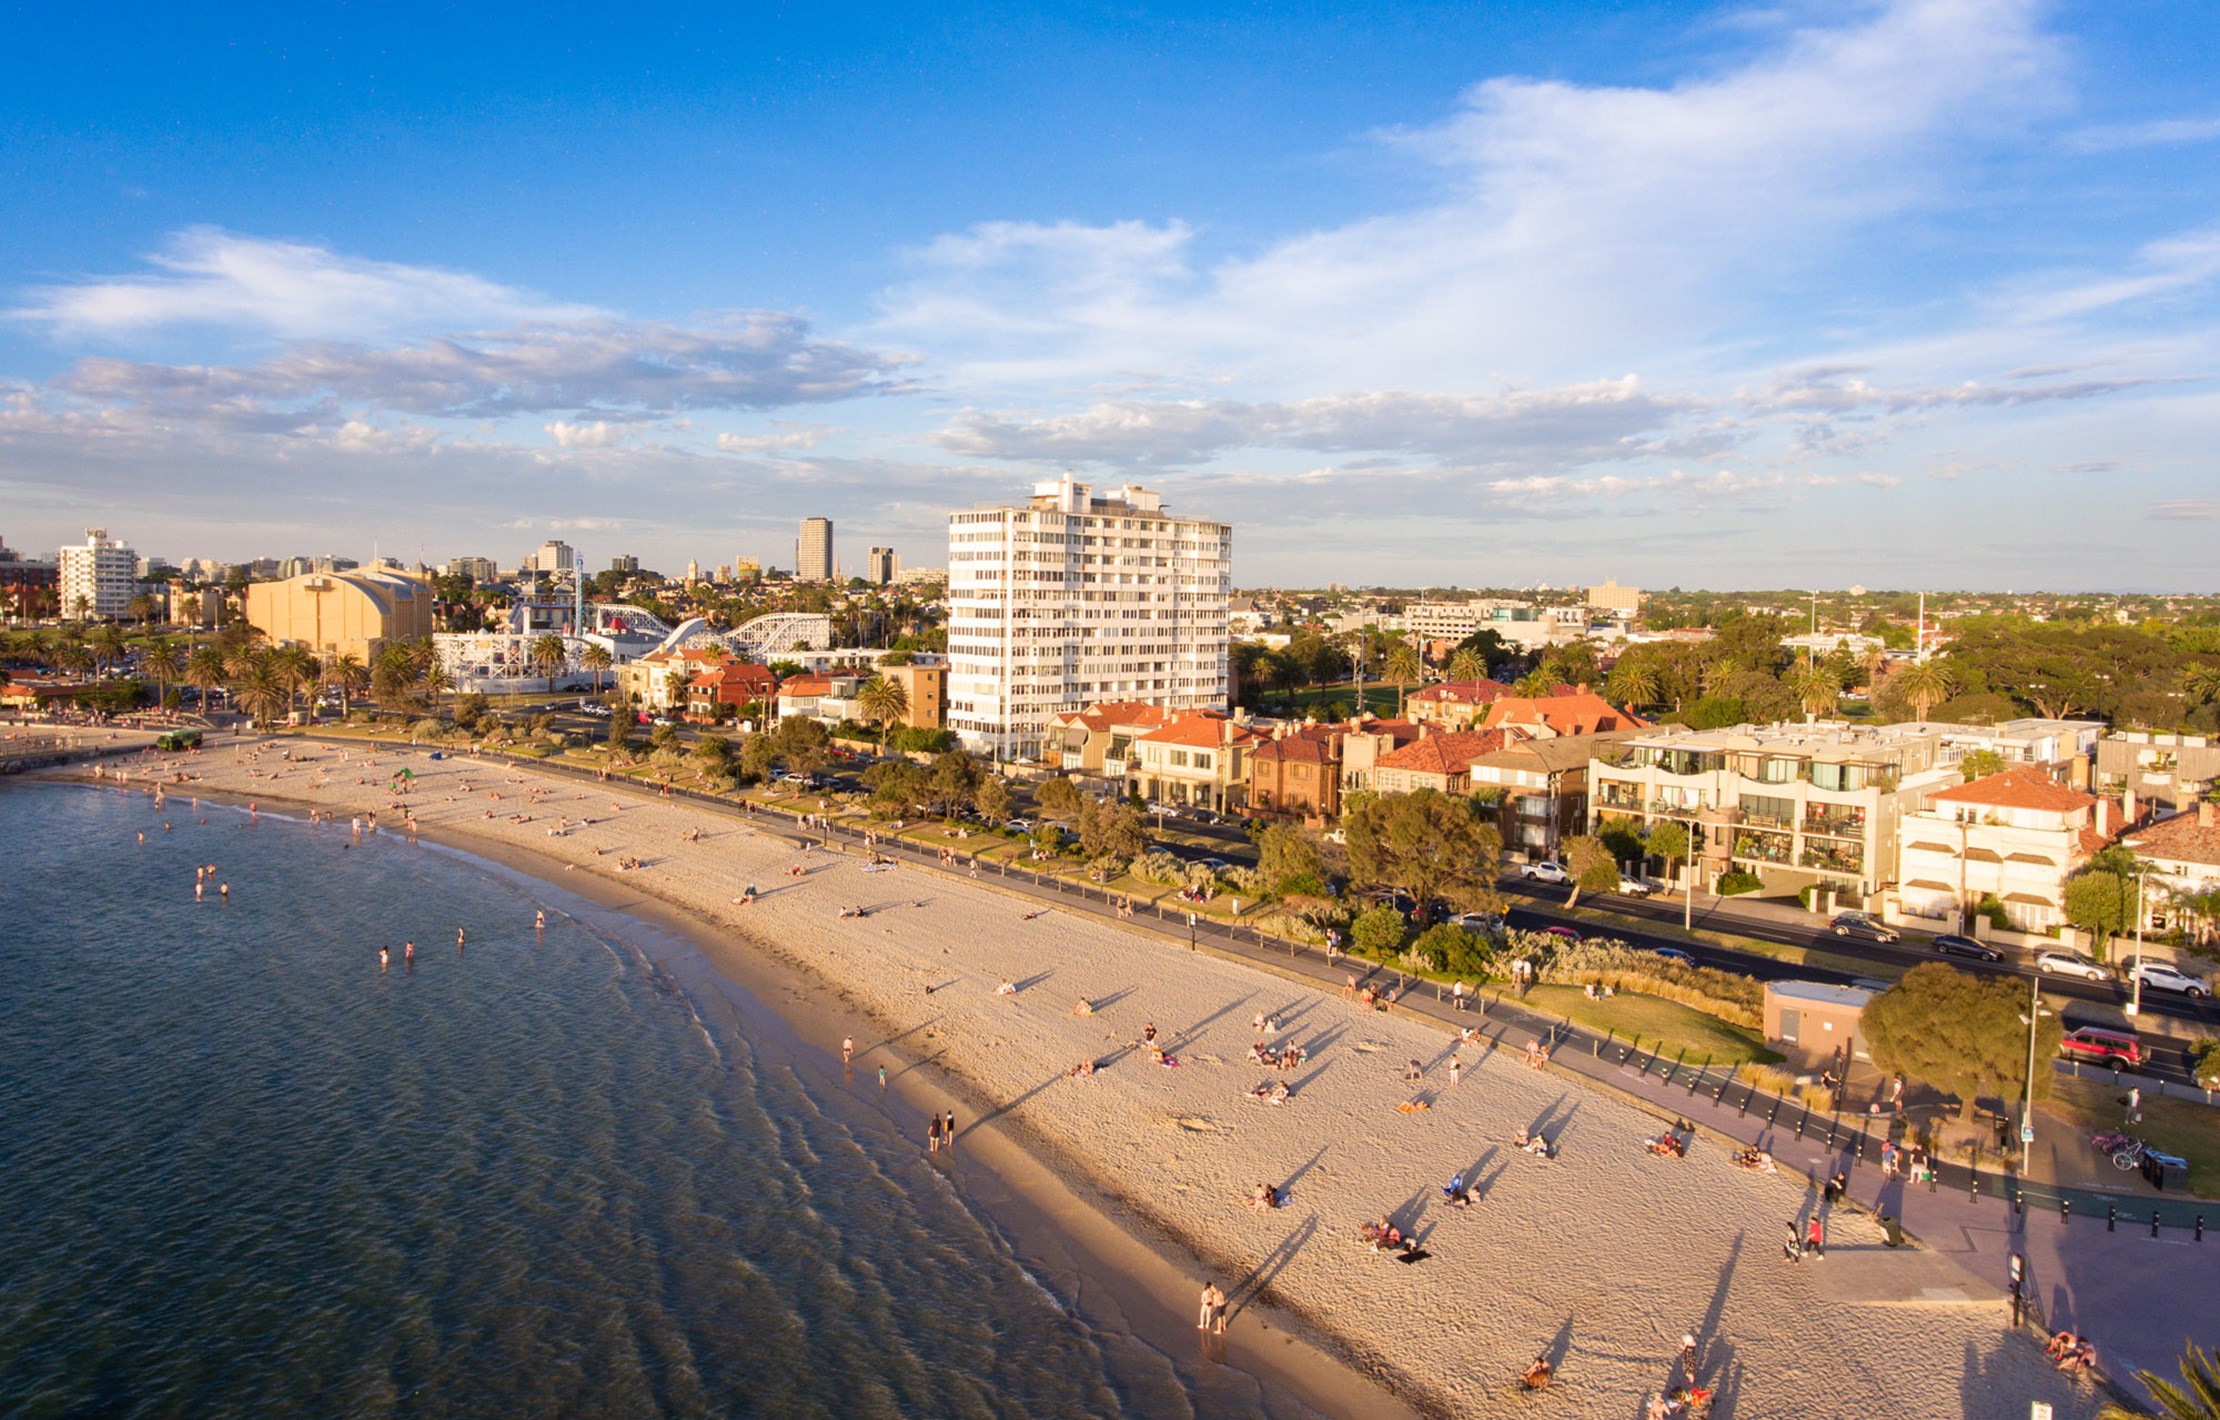 An arial view of the St Kilda foreshore bathed in a golden sunset light.